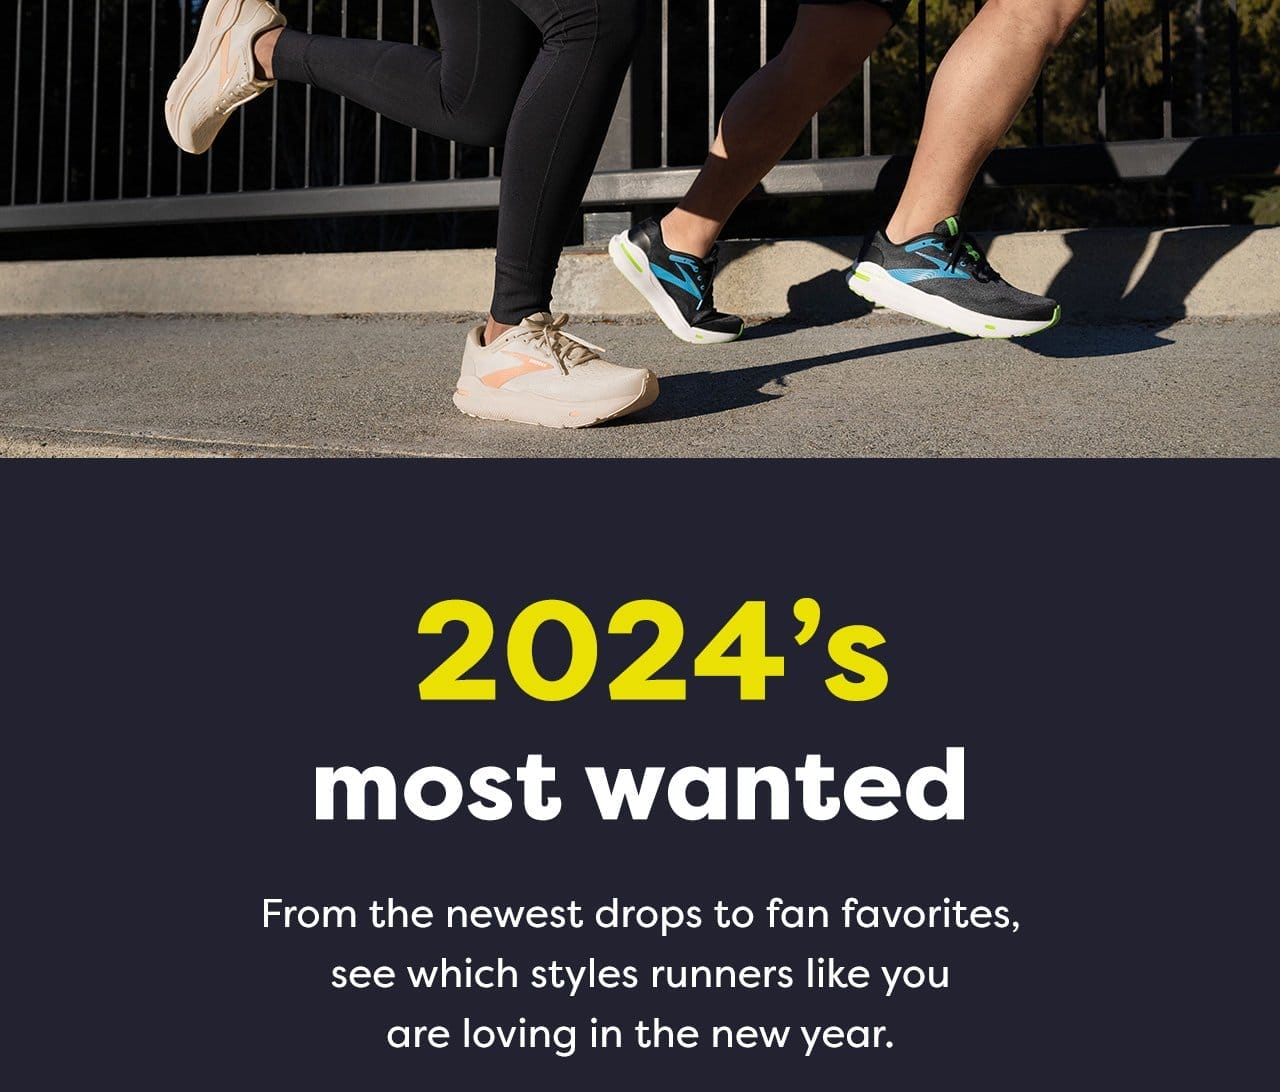 2024's most wanted - From the newest drops to fan favorites, see which styles runners like you are loving in the new year.